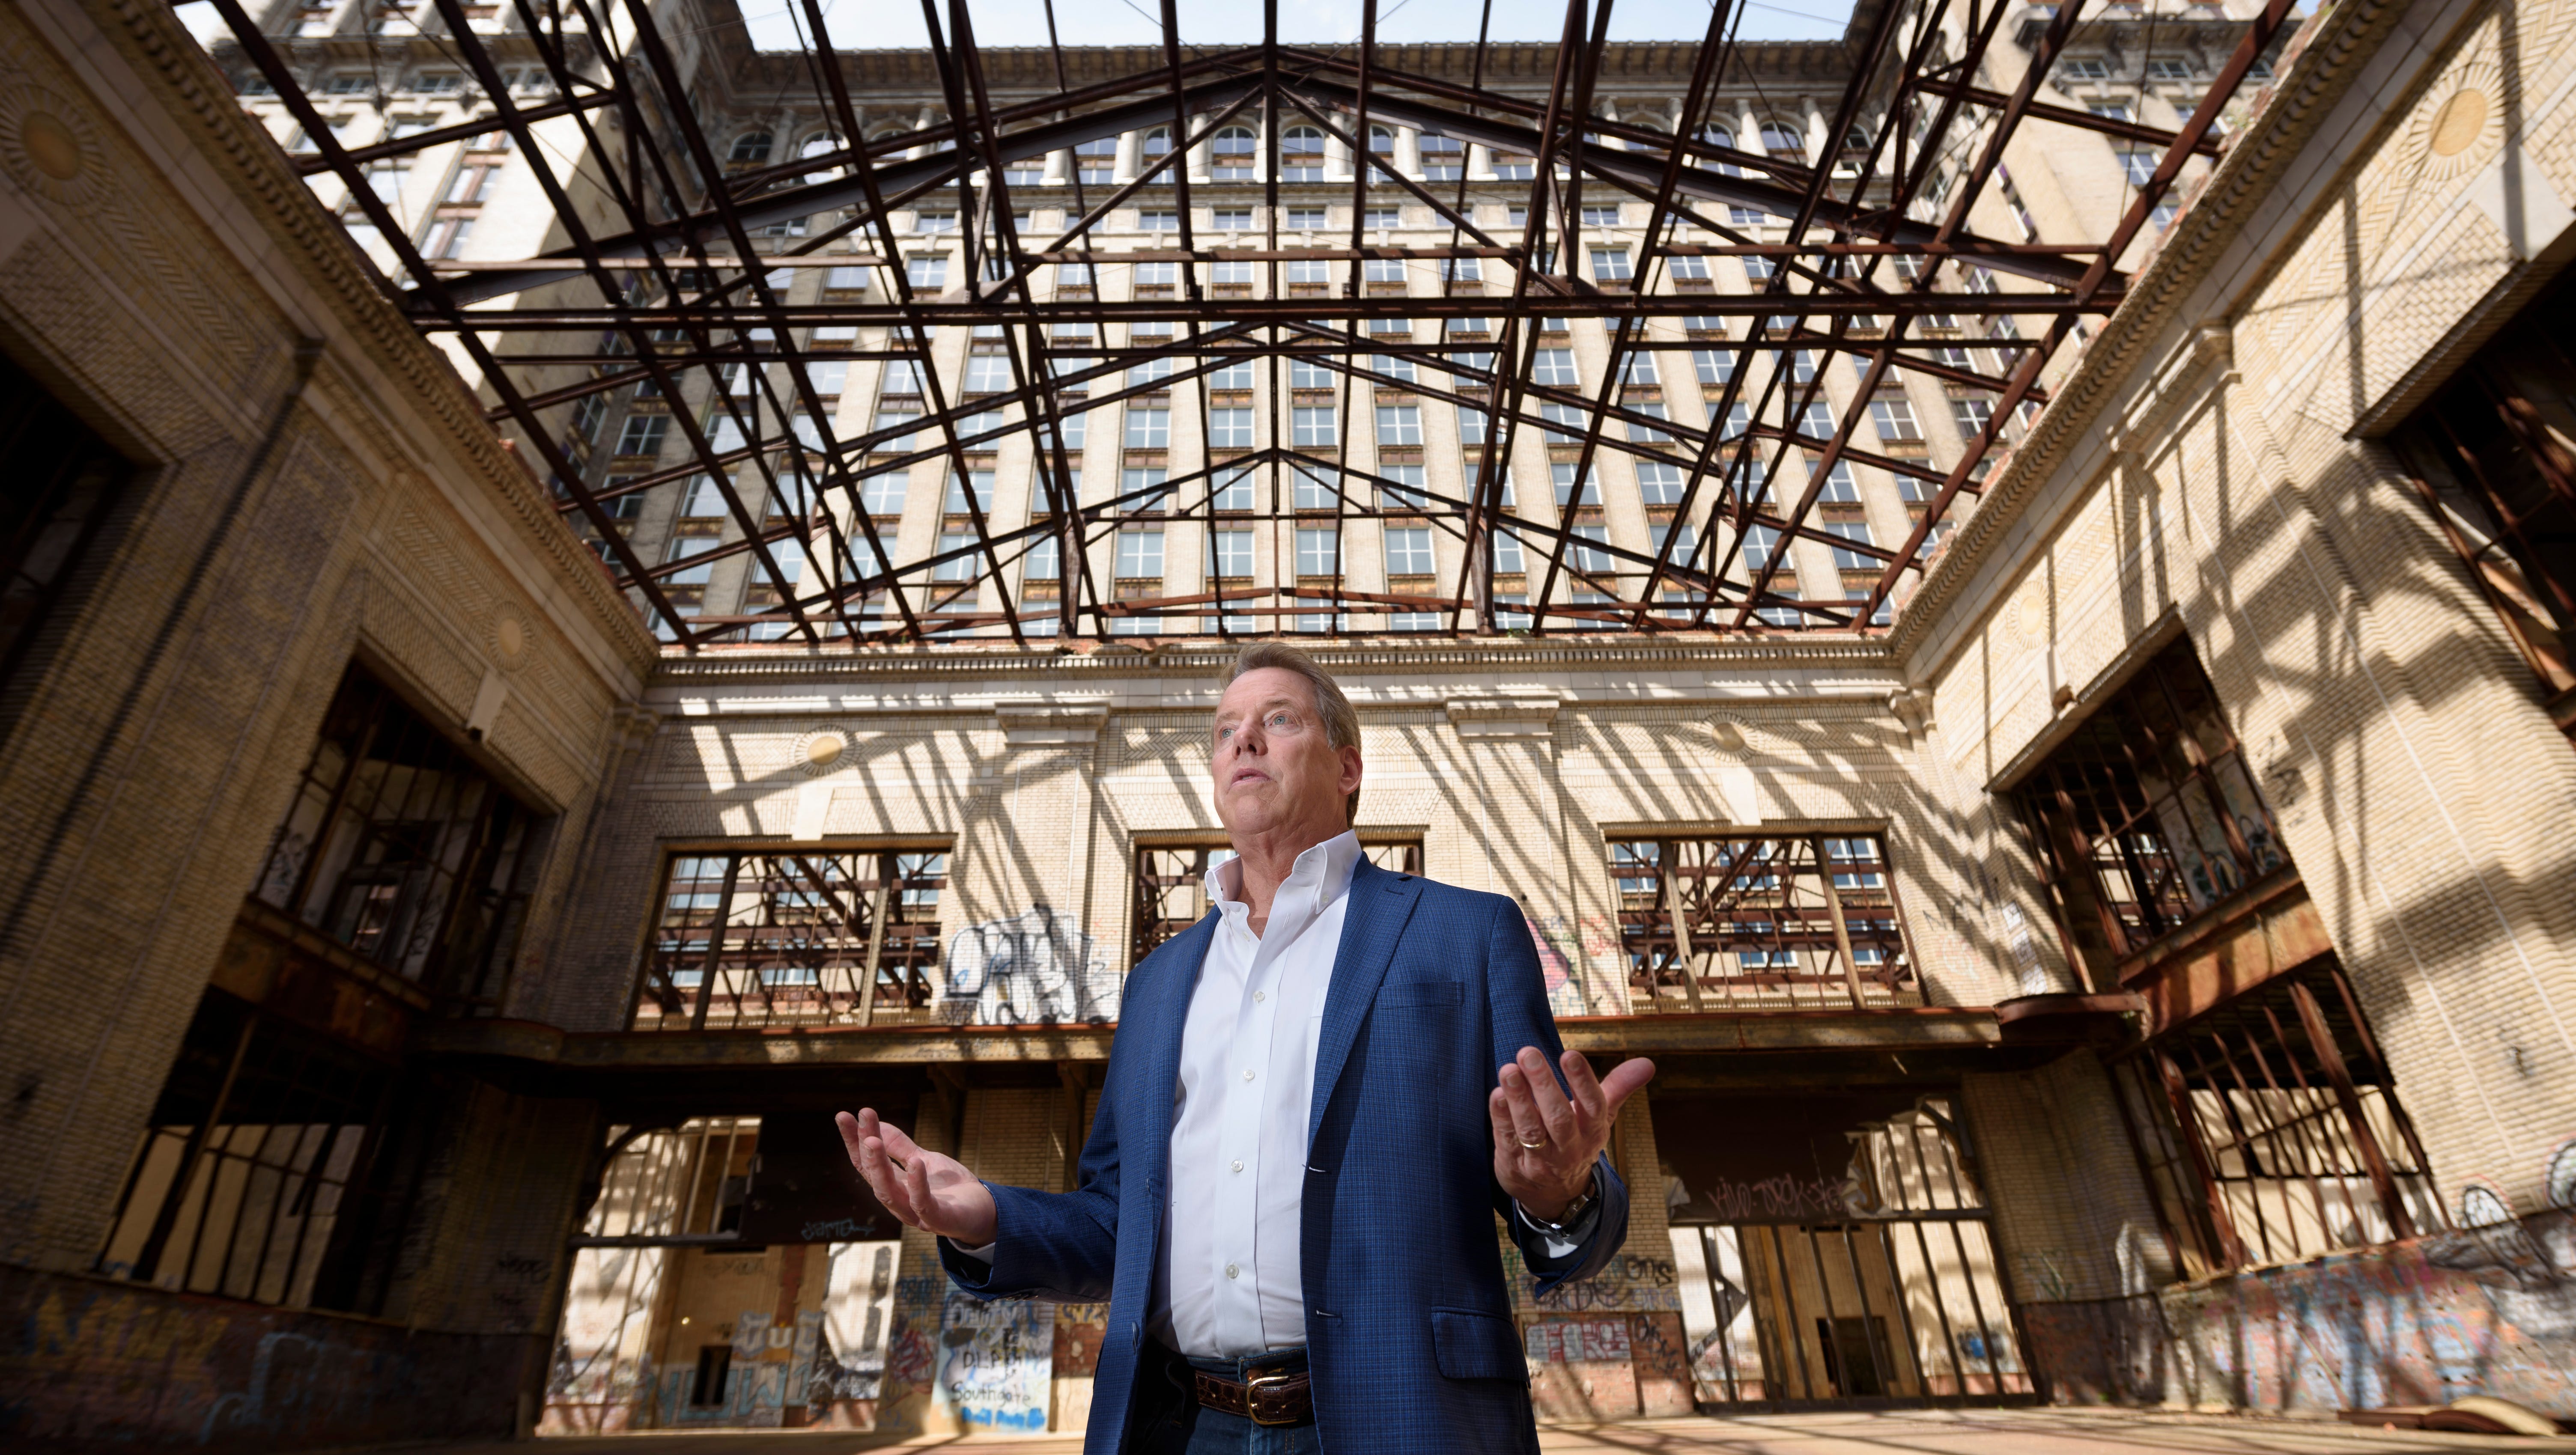 "It's not just a building," said Ford Executive Chairman Bill Ford Jr., standing in the depot's atrium. "It's an amazing building, but it's about all the connections to Detroit, to the suburbs, and the vision around developing the next generation of transportation."